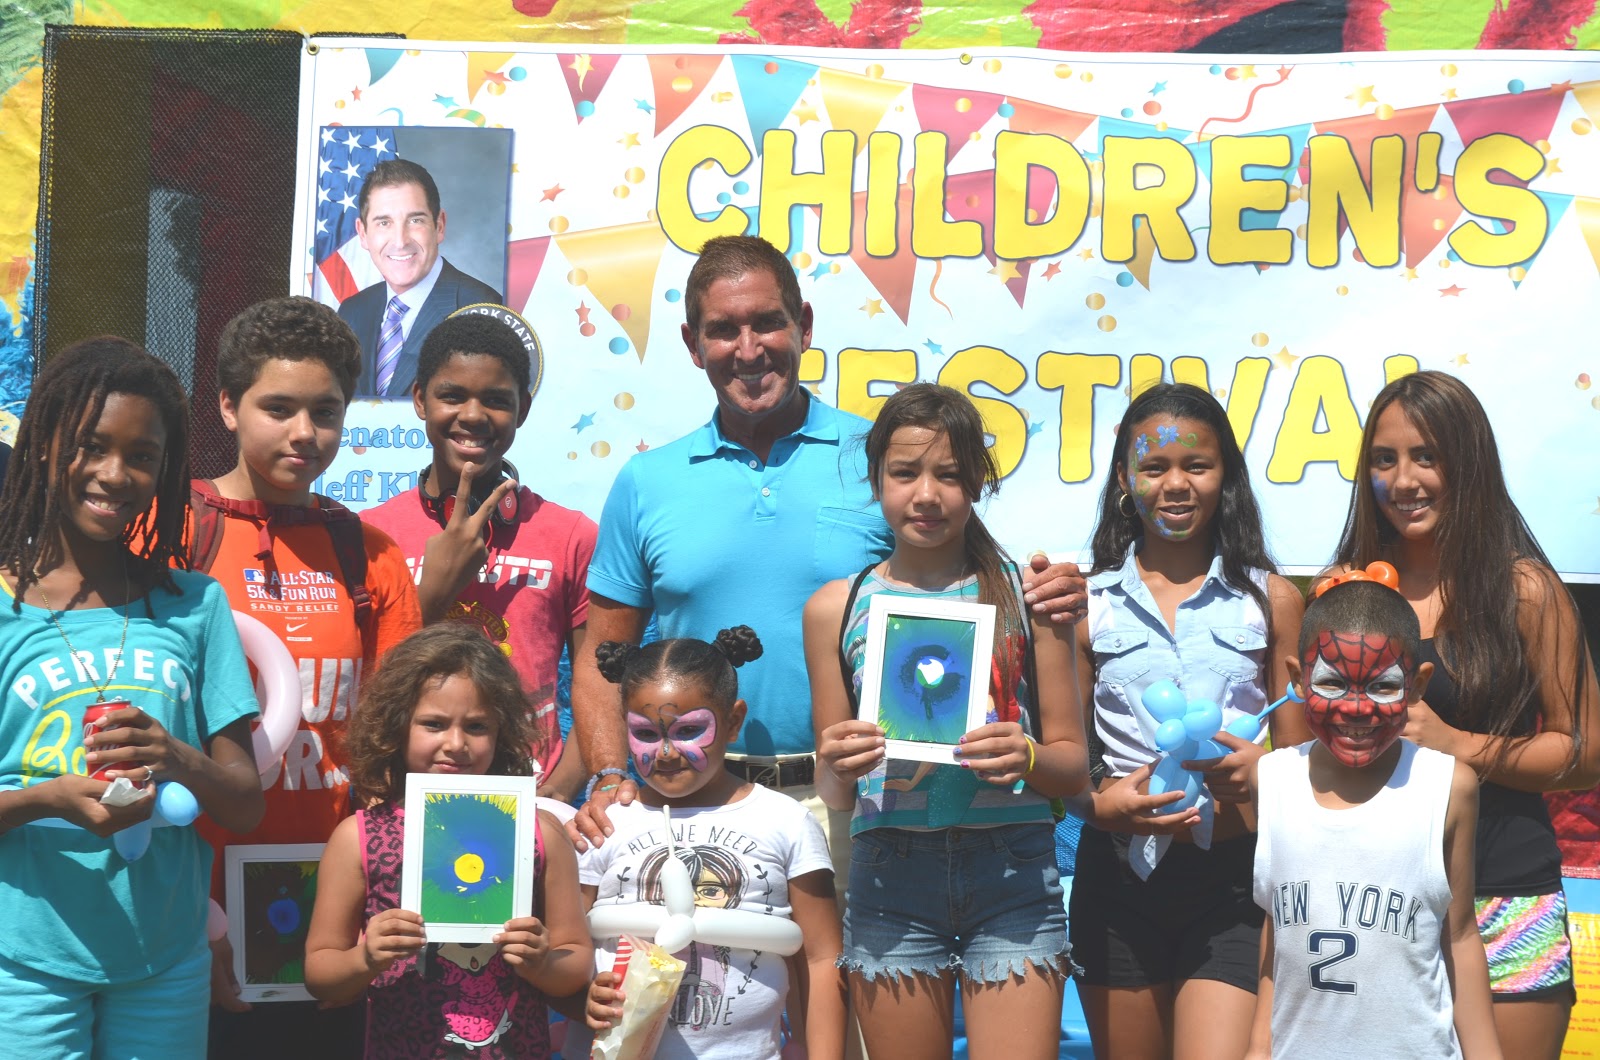 Senator Klein posing with local youth at the Children's Festival. 